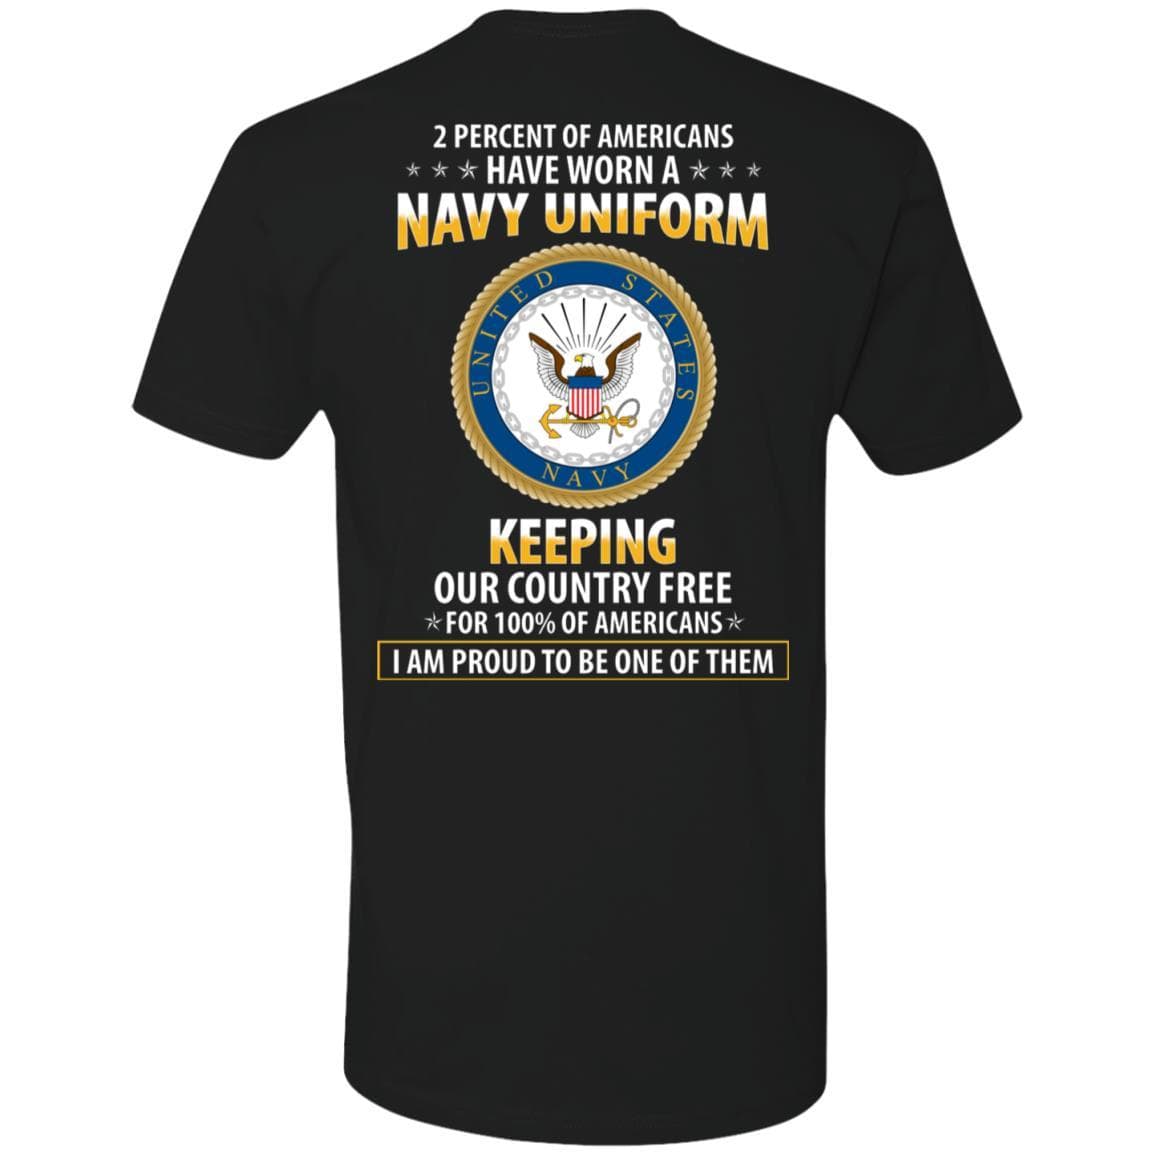 2 percent of Americans have worn a Navy Uniform, keeping our country free, I am proud to be one of them – Next Level Premium T-Shirt On Back